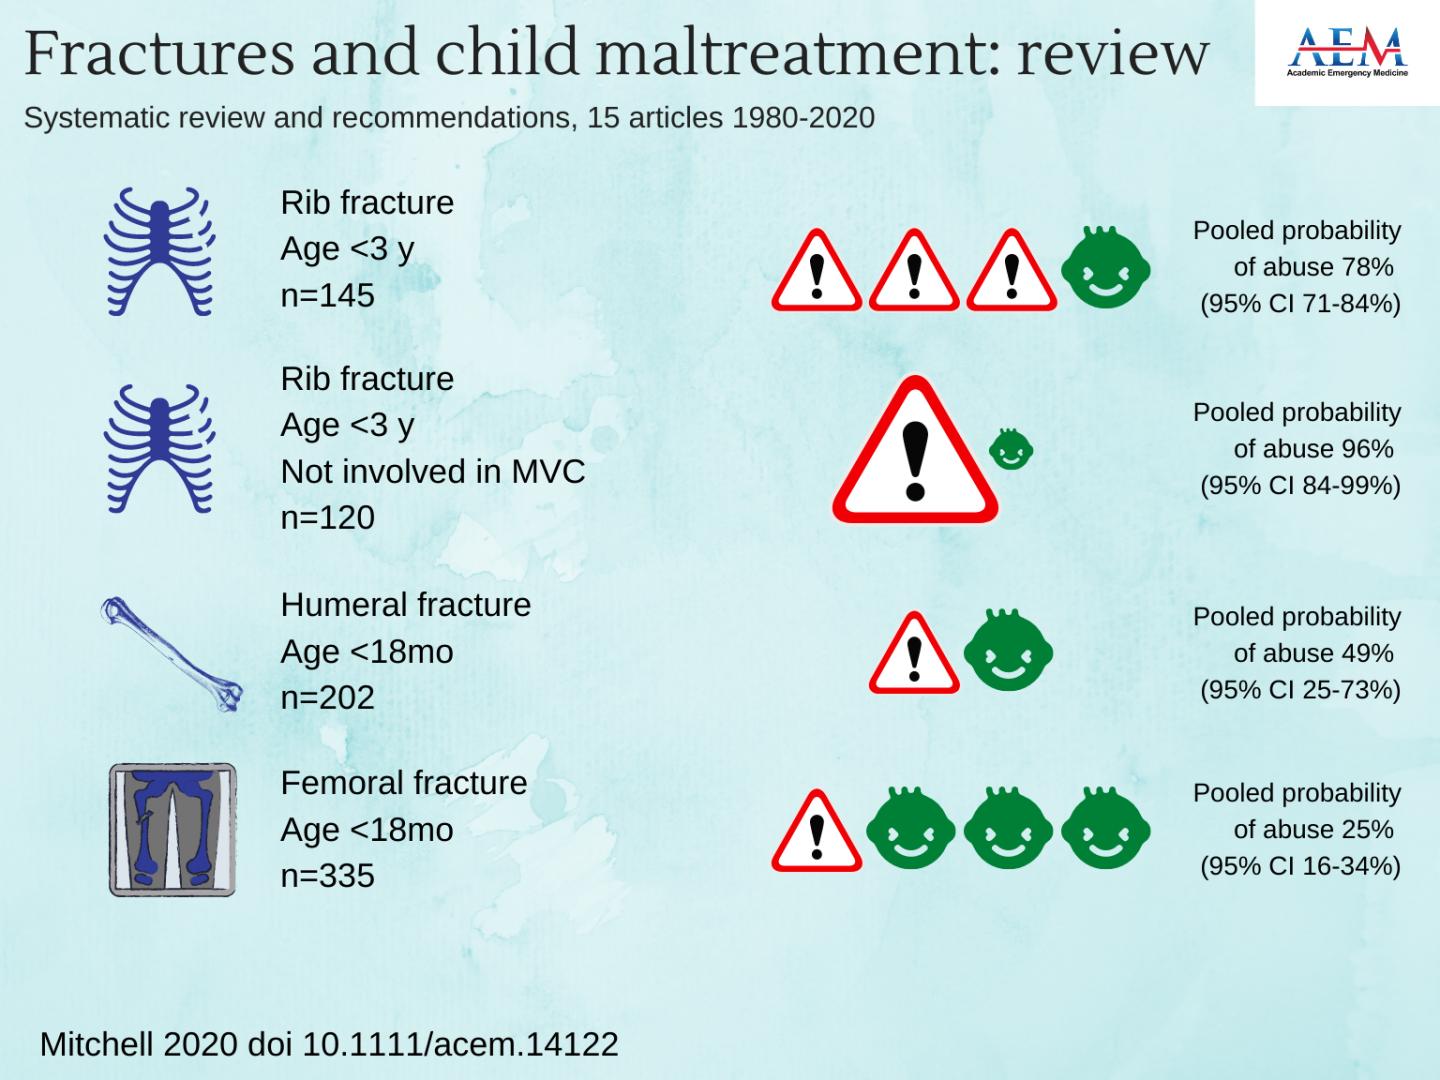 FRACTURES AND CHILD MALTREATMENT: REVIEW